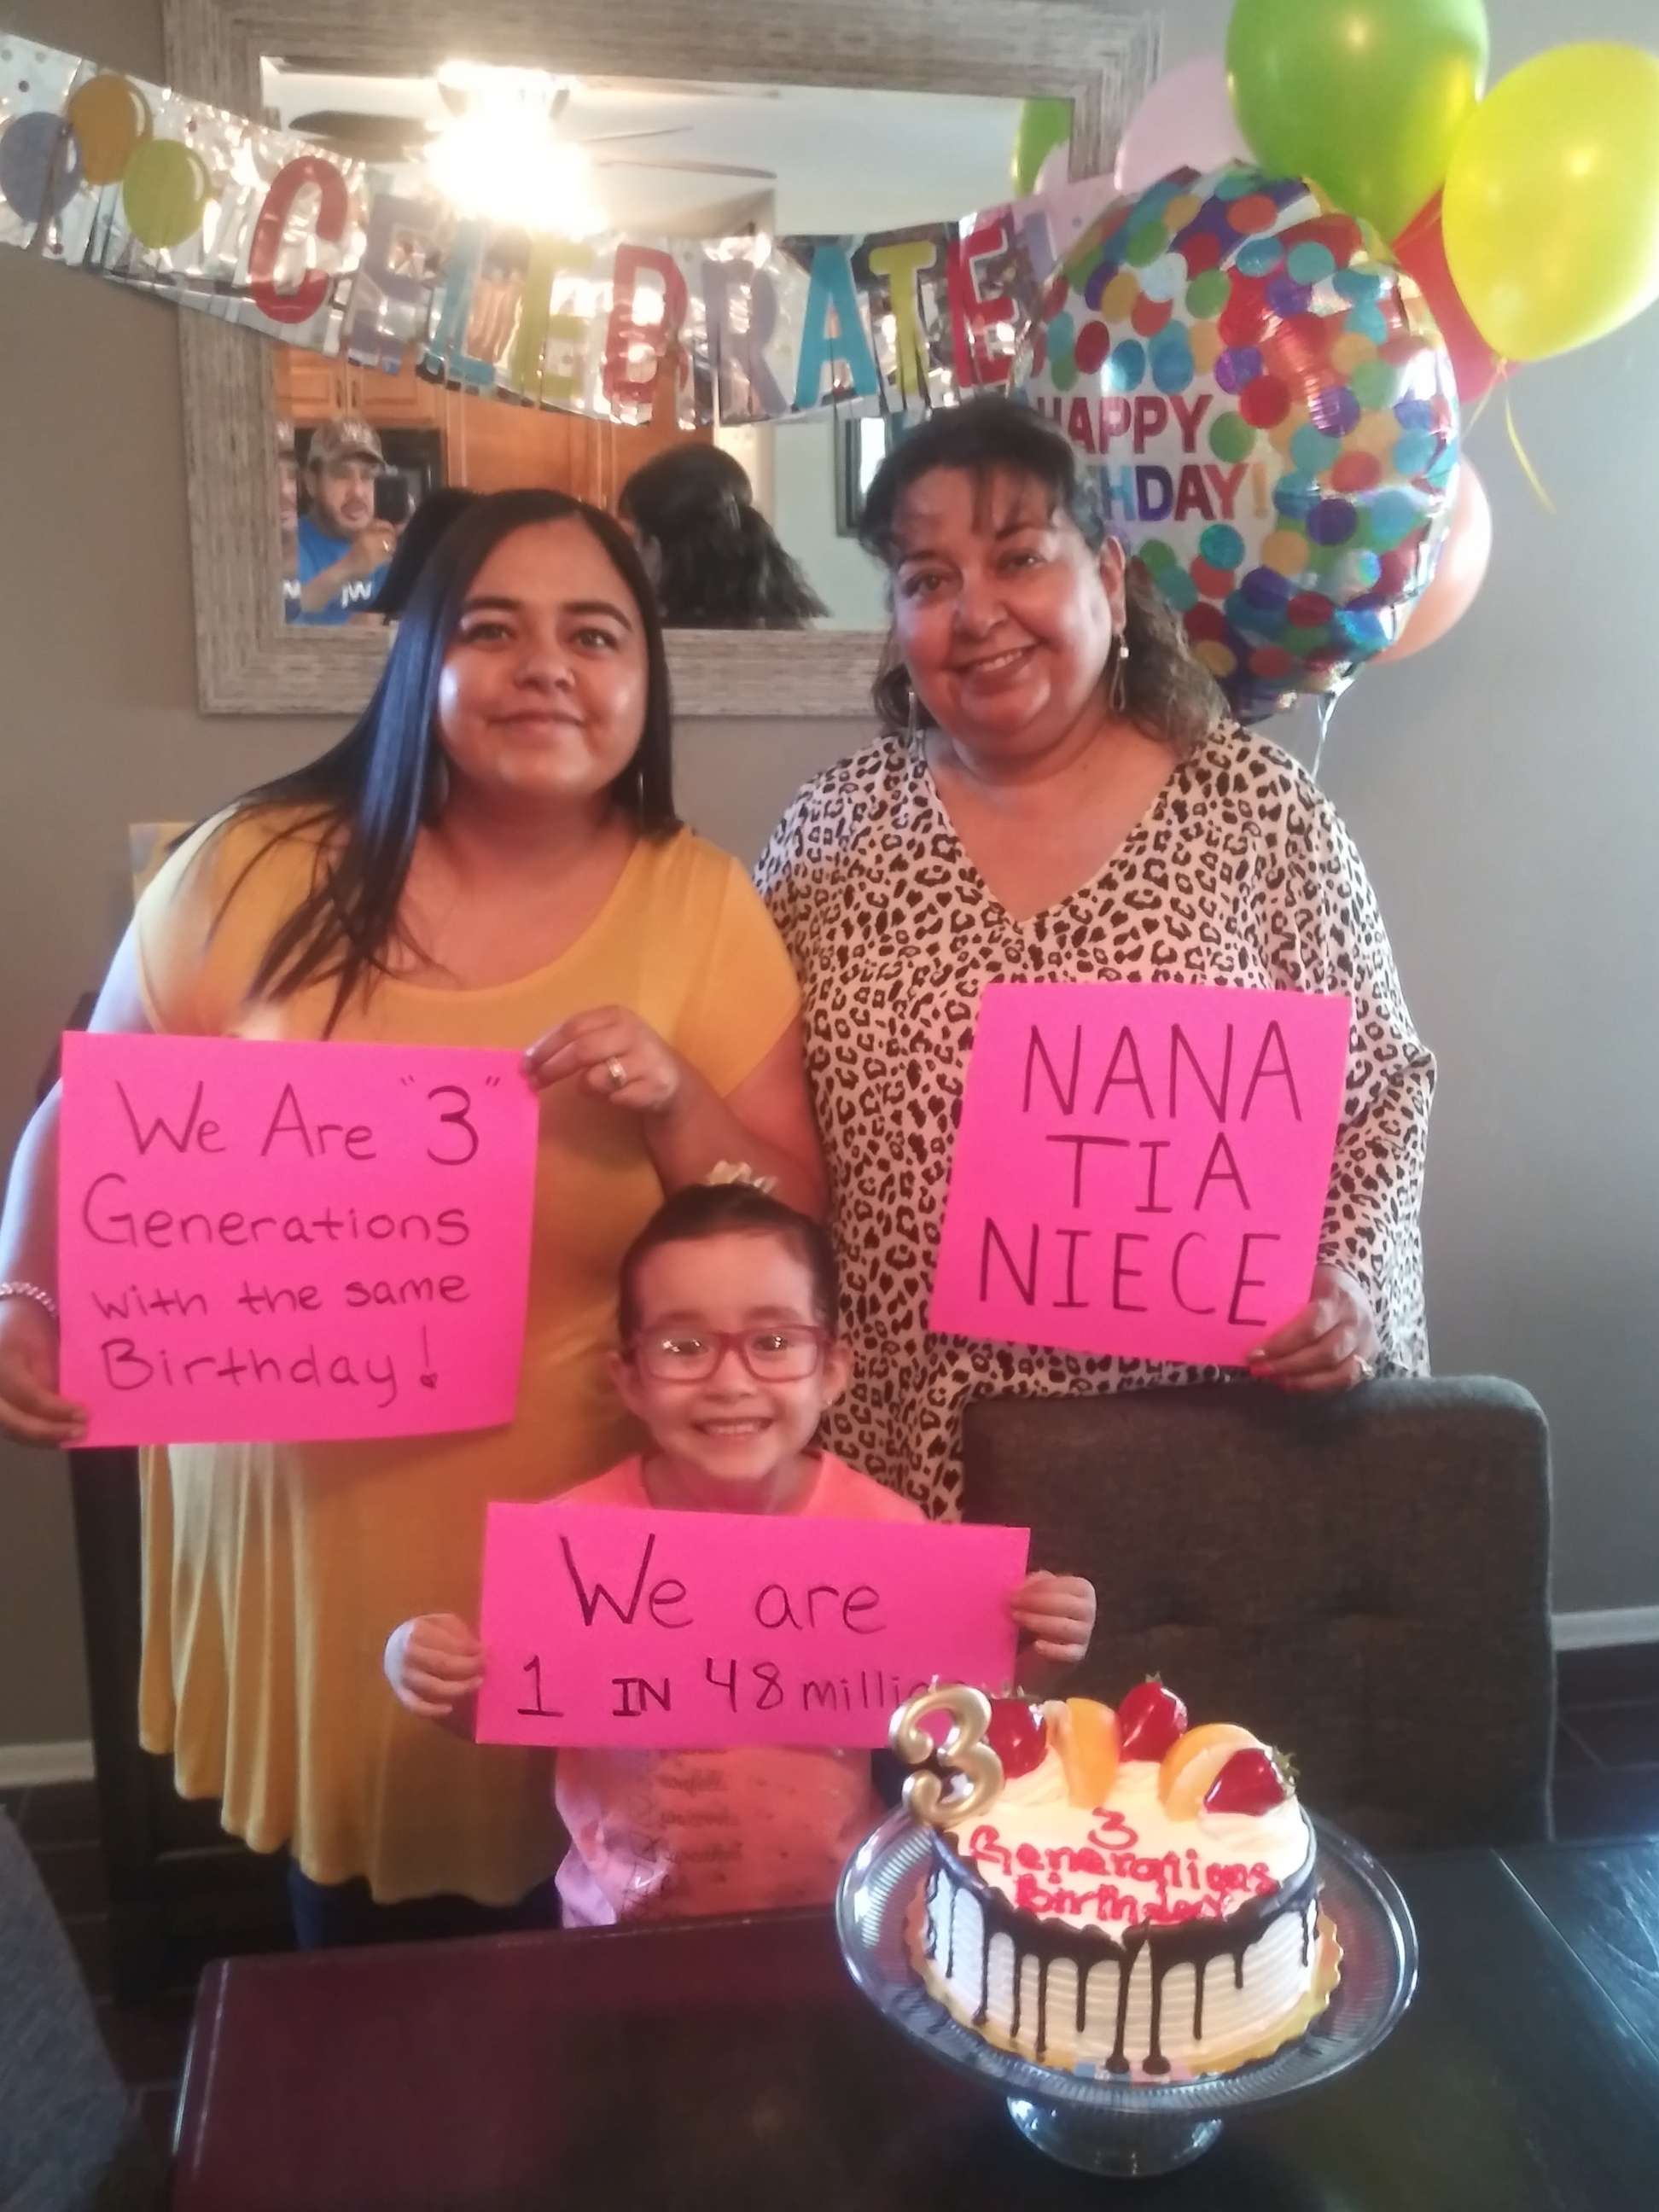 PHOTO: Lourdes Pizarro (aka Nana) was born Oct. 2, 1959. On Oct. 2, 1989, Pizarro gave birth to Jessica Chavez. On Oct. 2, 2013, Pizarro's other daughter, Sarah, welcomed Sabella Contreras. Sabella turned 6 this year. 
